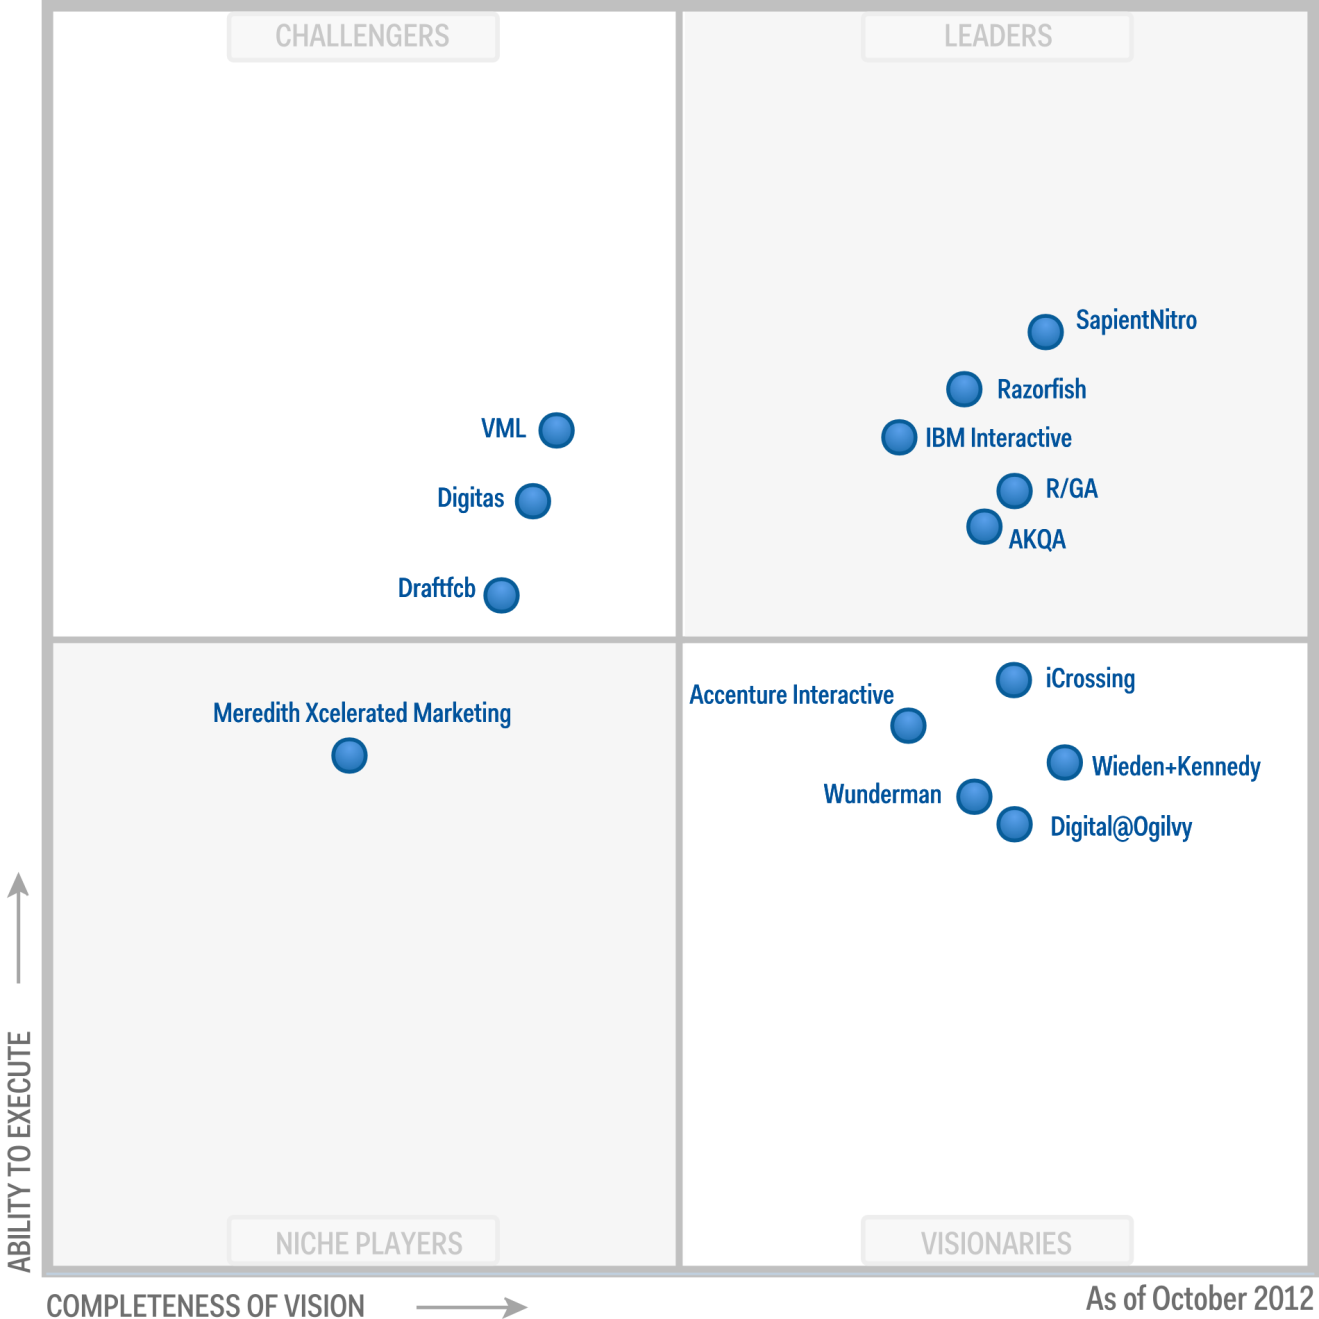 Magic Quadrant Challengers, Leaders, Niche Players, and Visionaries ordered by Ability to Execute and Completeness of Vision